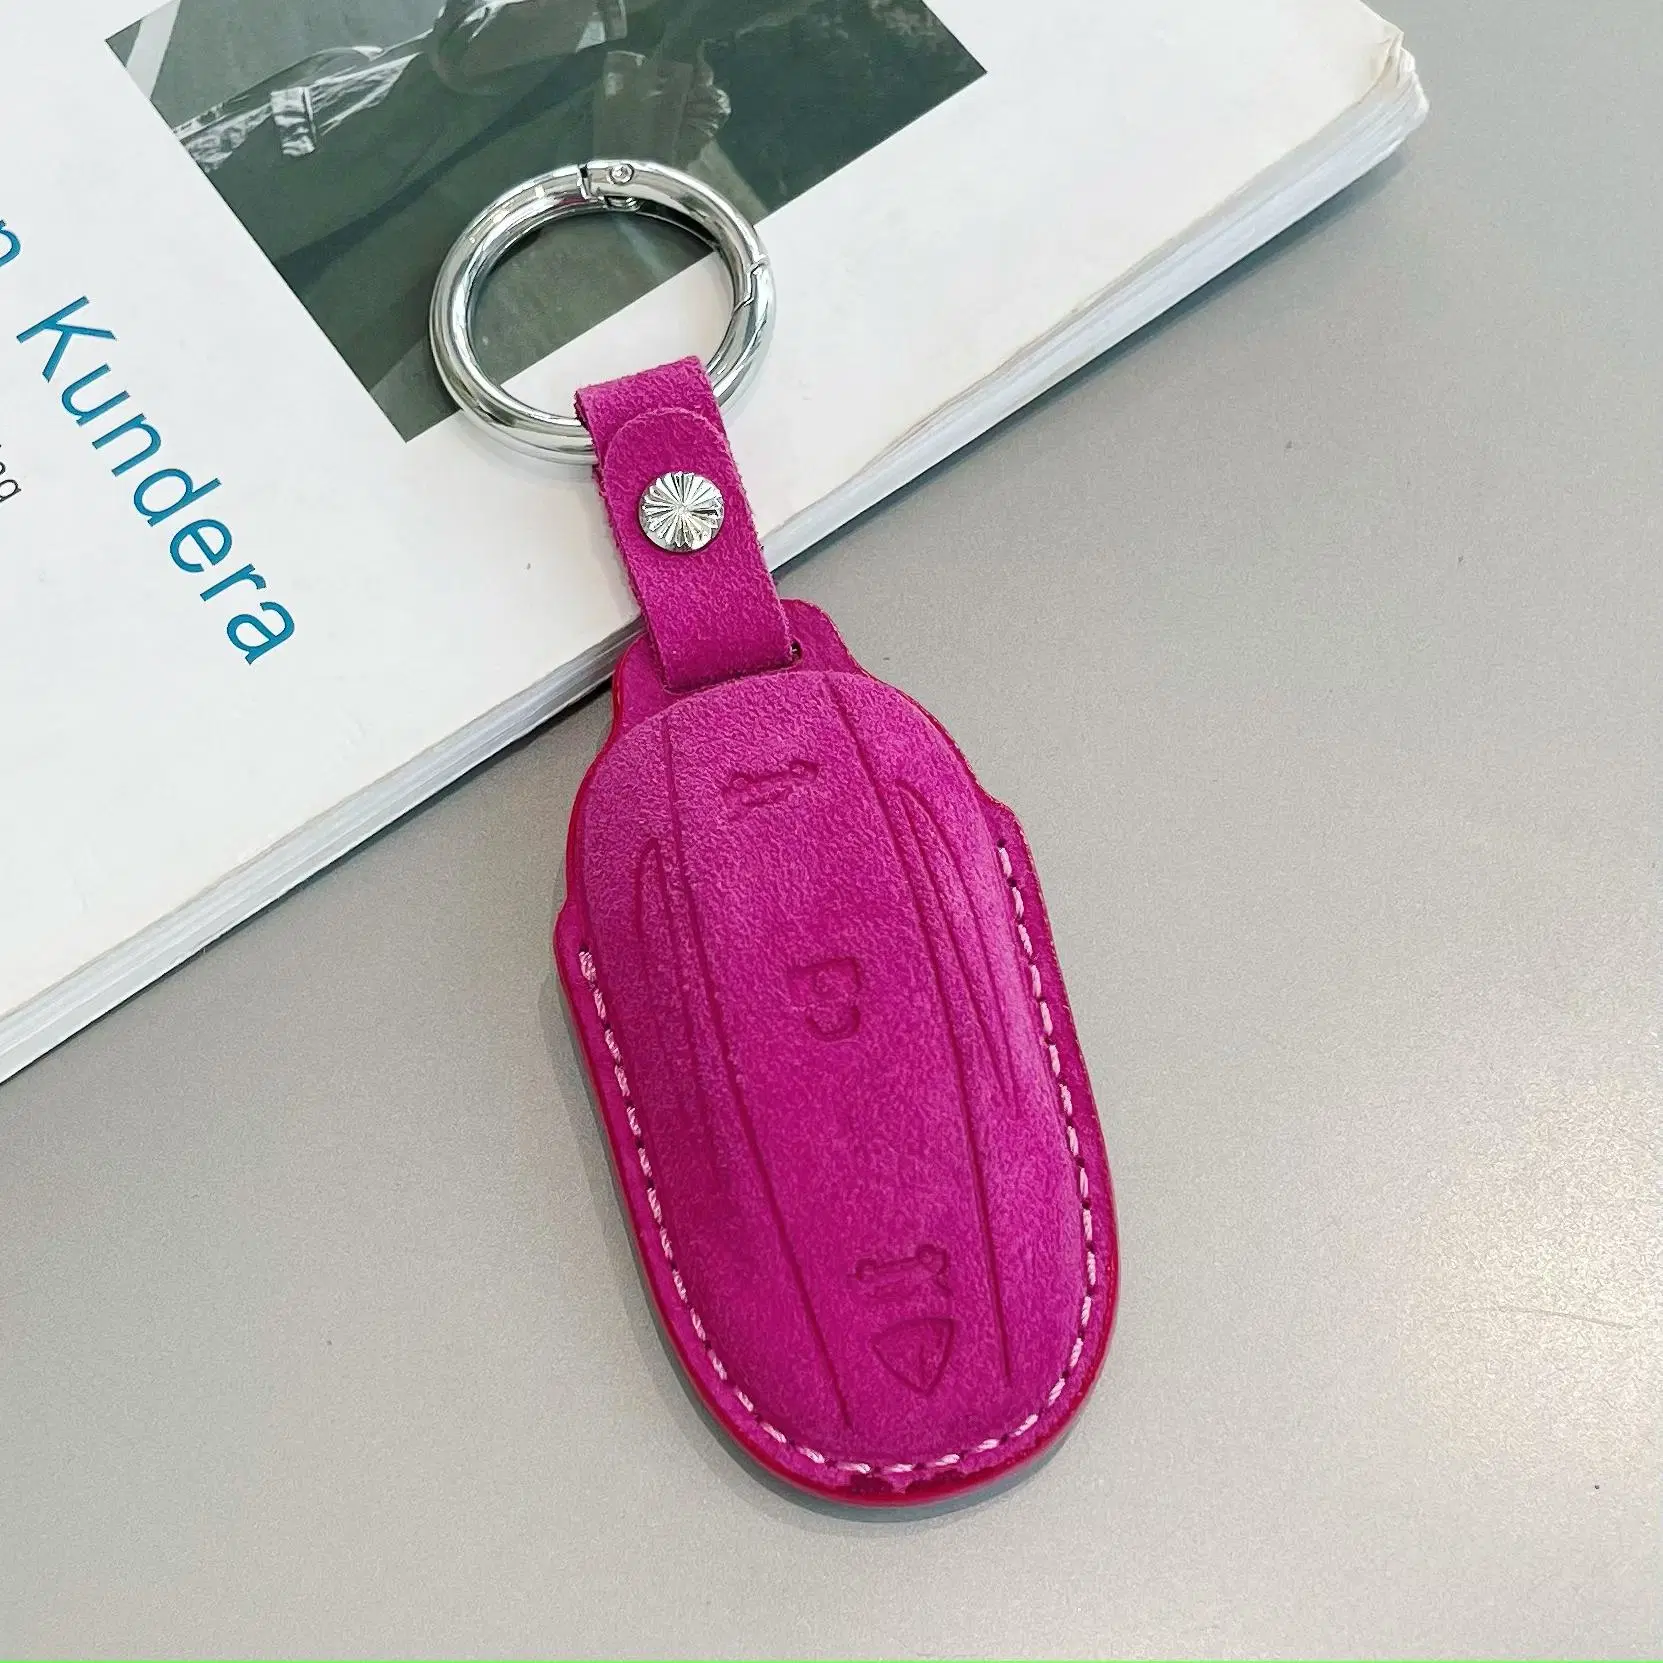 (WD2482) General Car Key Case Cute Personalized Storage Large-Capacity Multi-Function Small Key Case